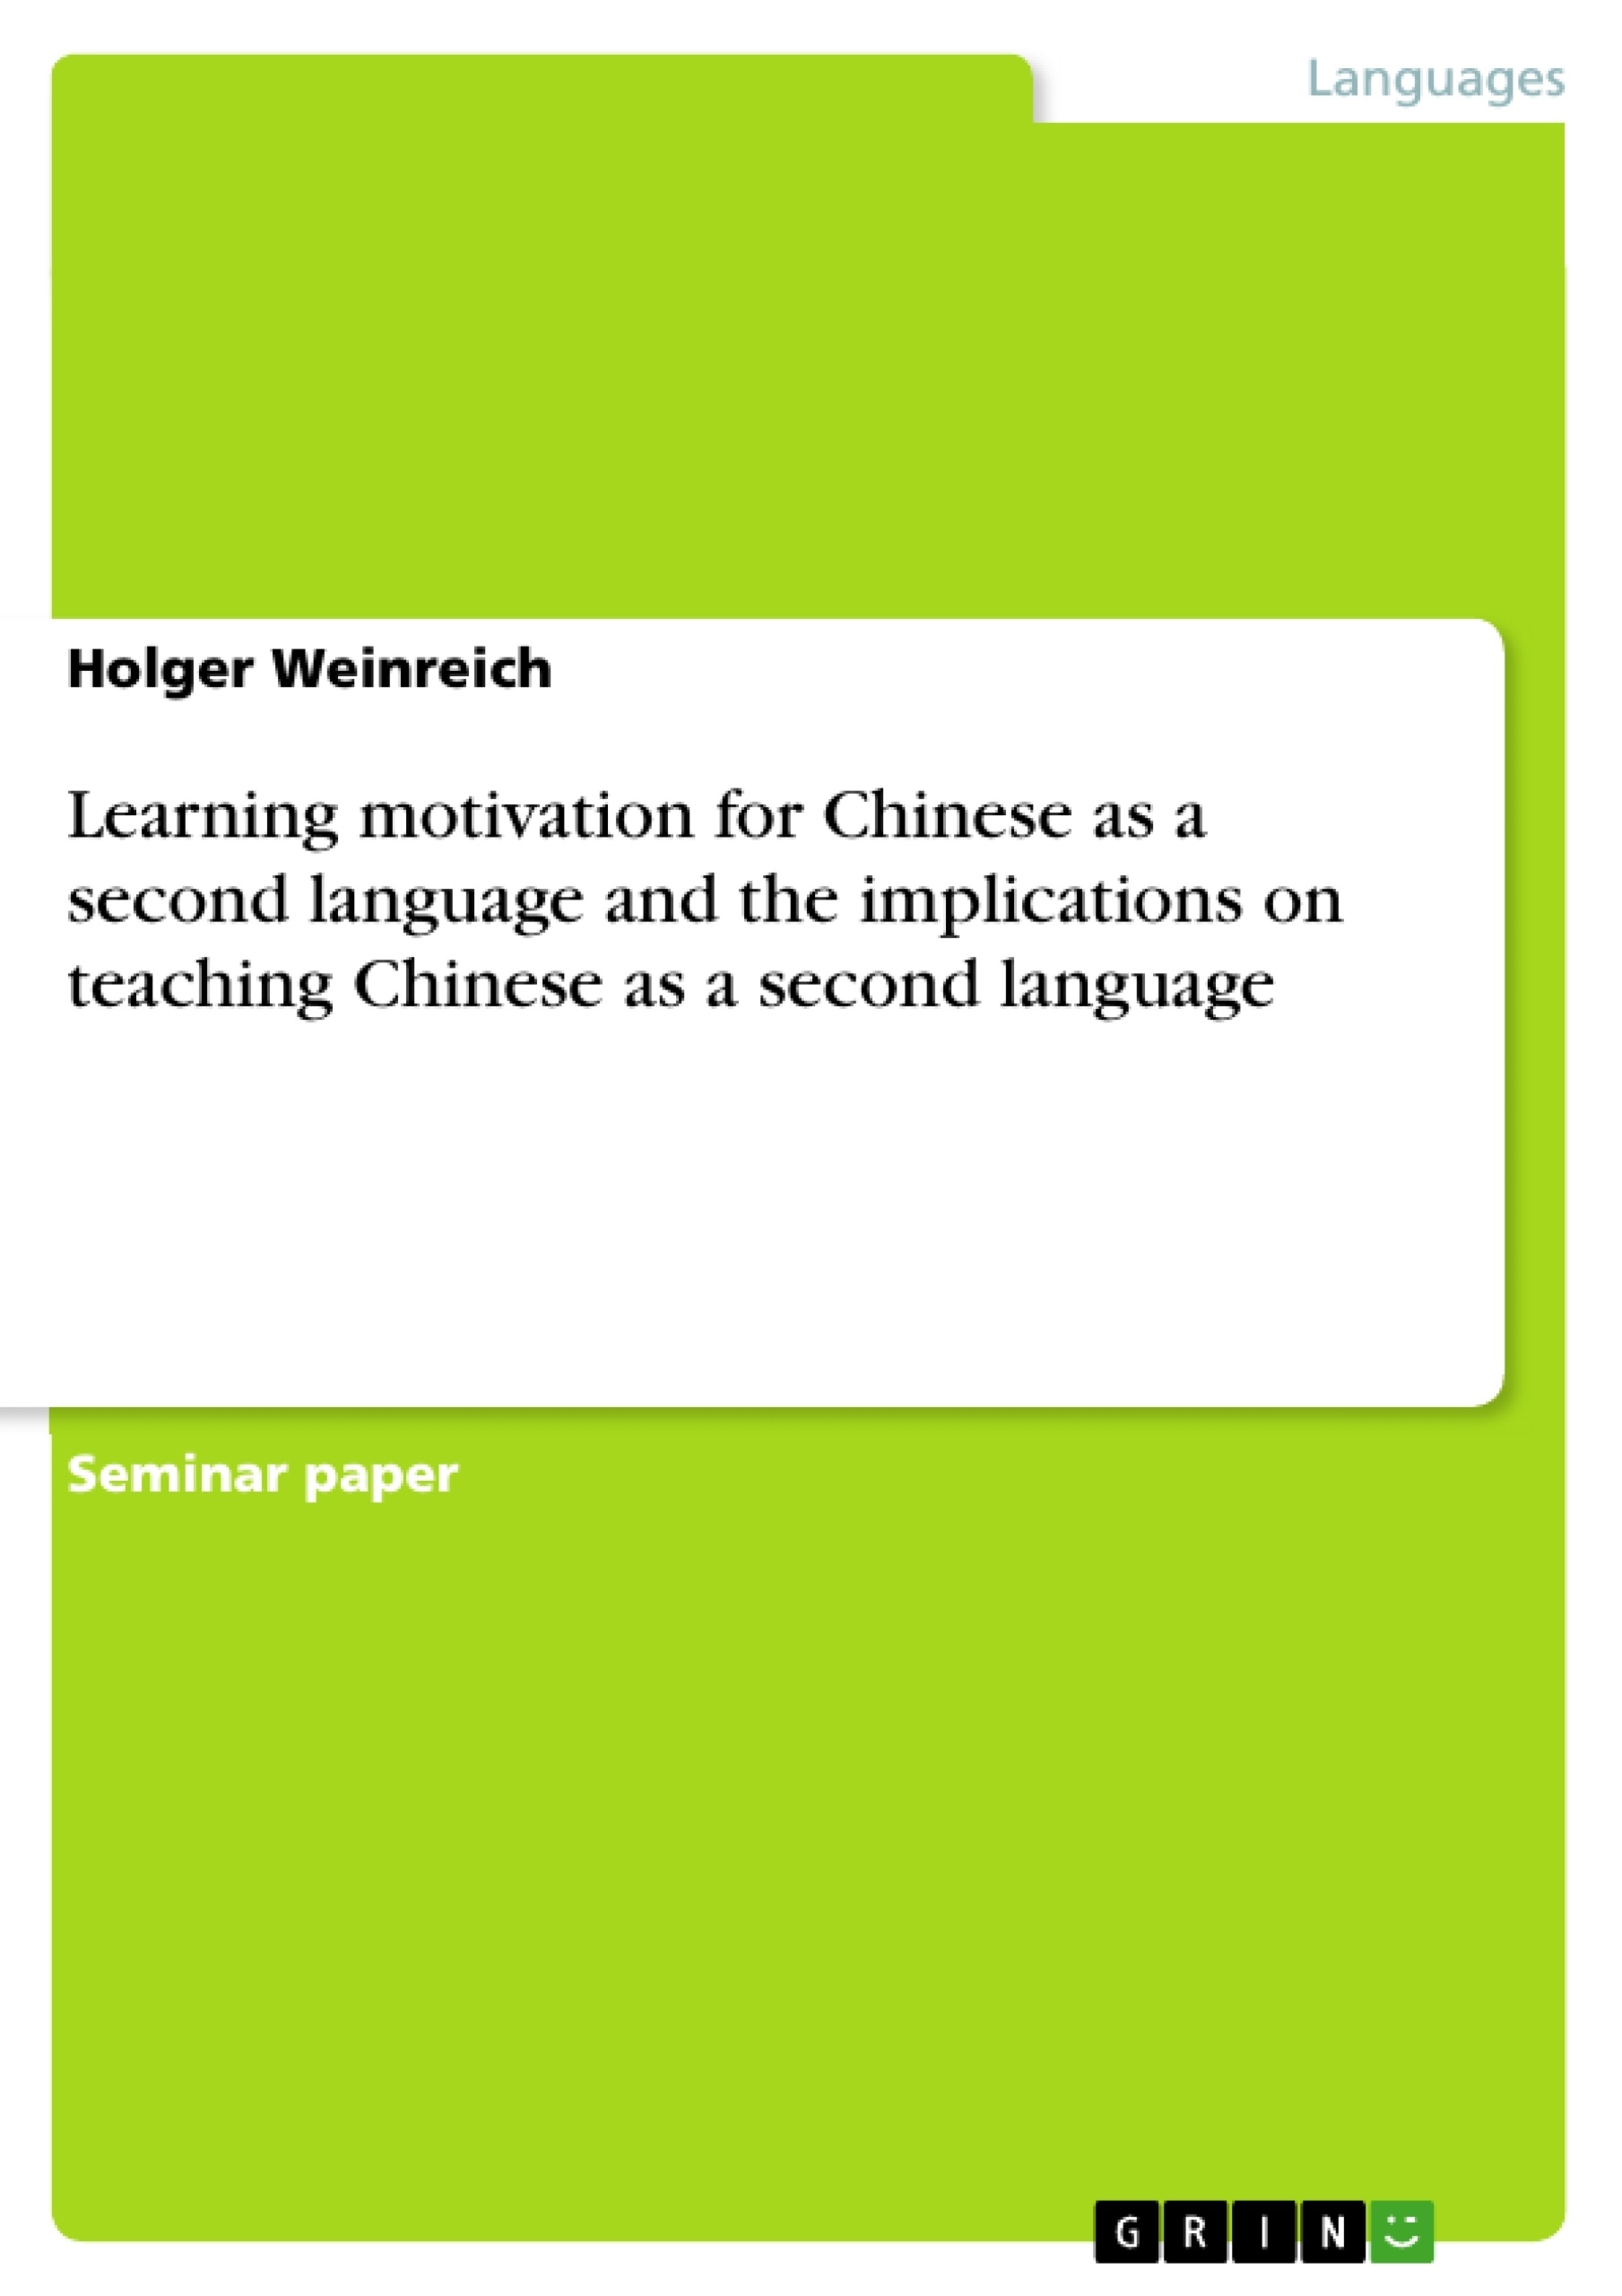 Titre: Learning motivation for Chinese as a second language and the implications on teaching Chinese as a second language